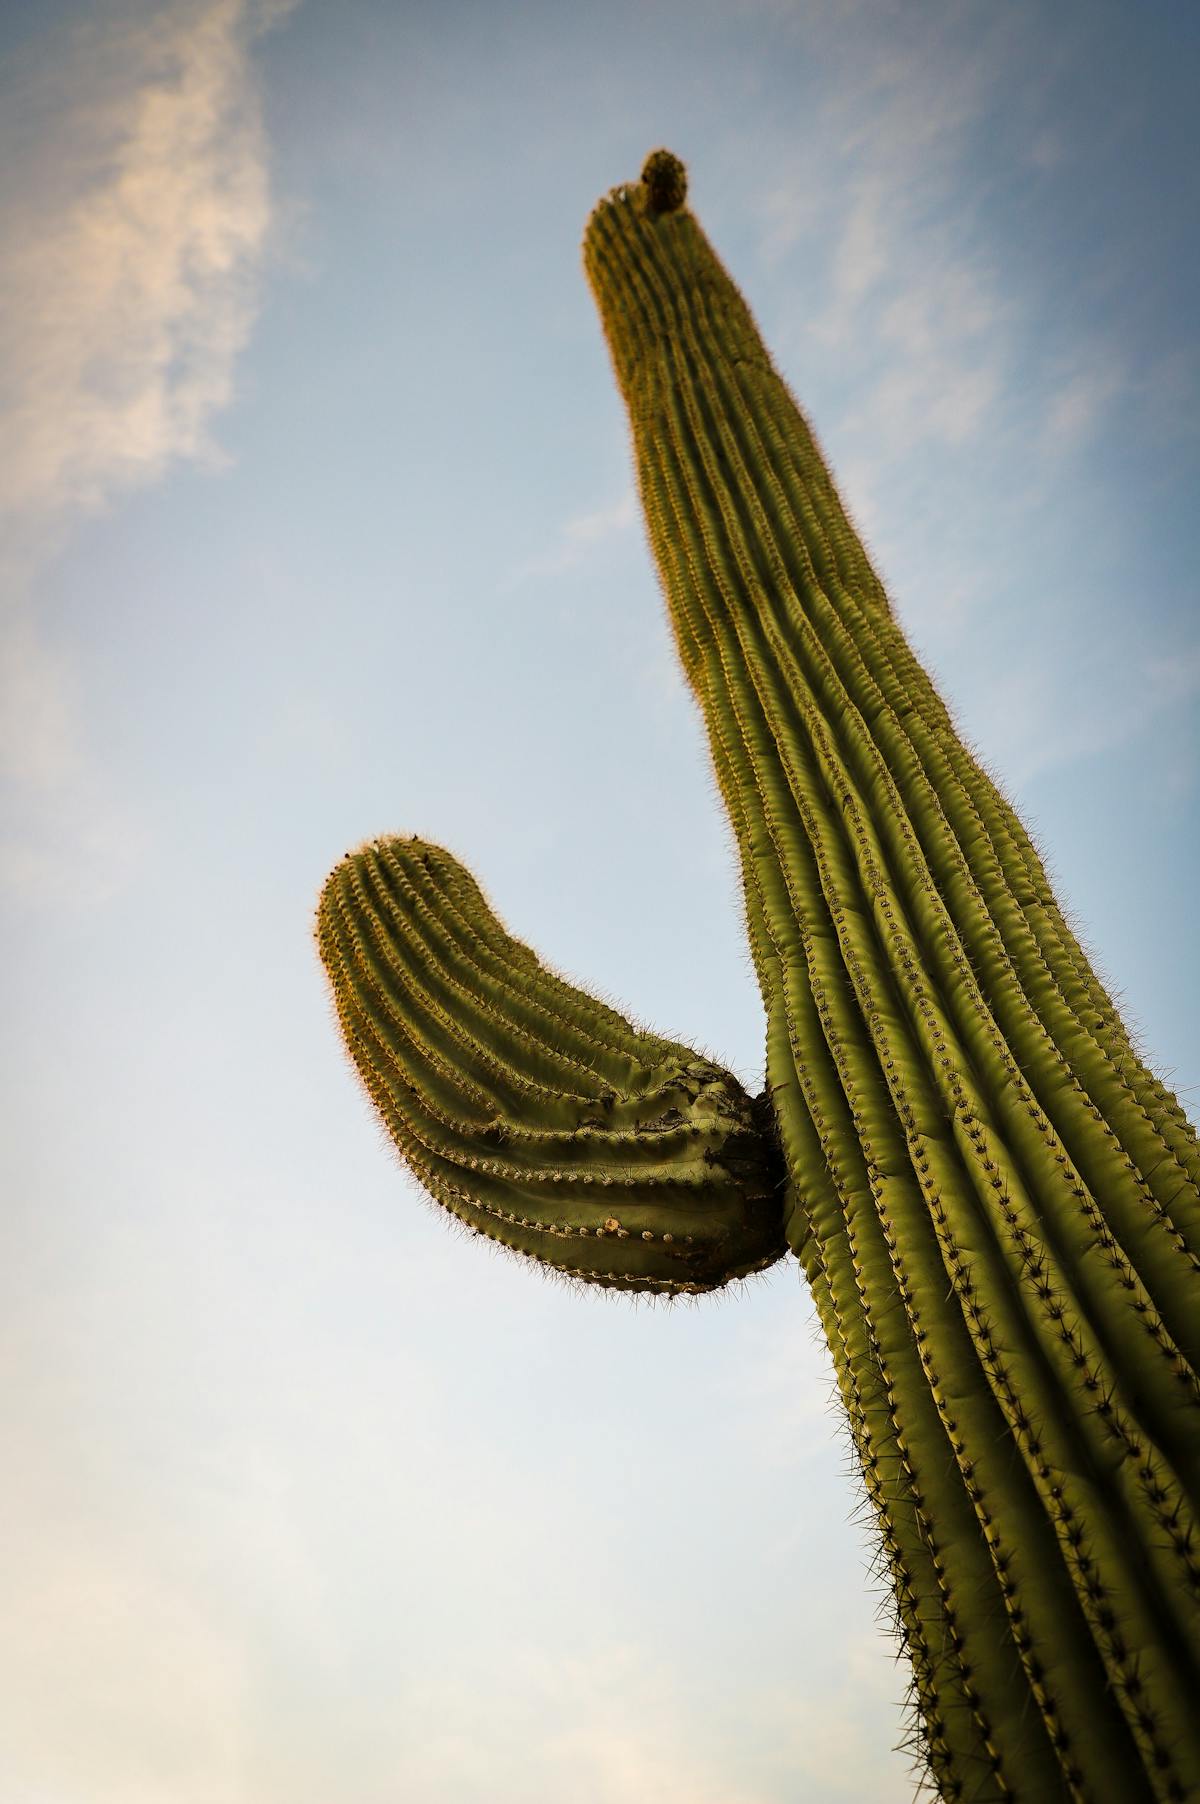 The pleated form of the saguaro cactus offer the plant shade from the blistering sun.